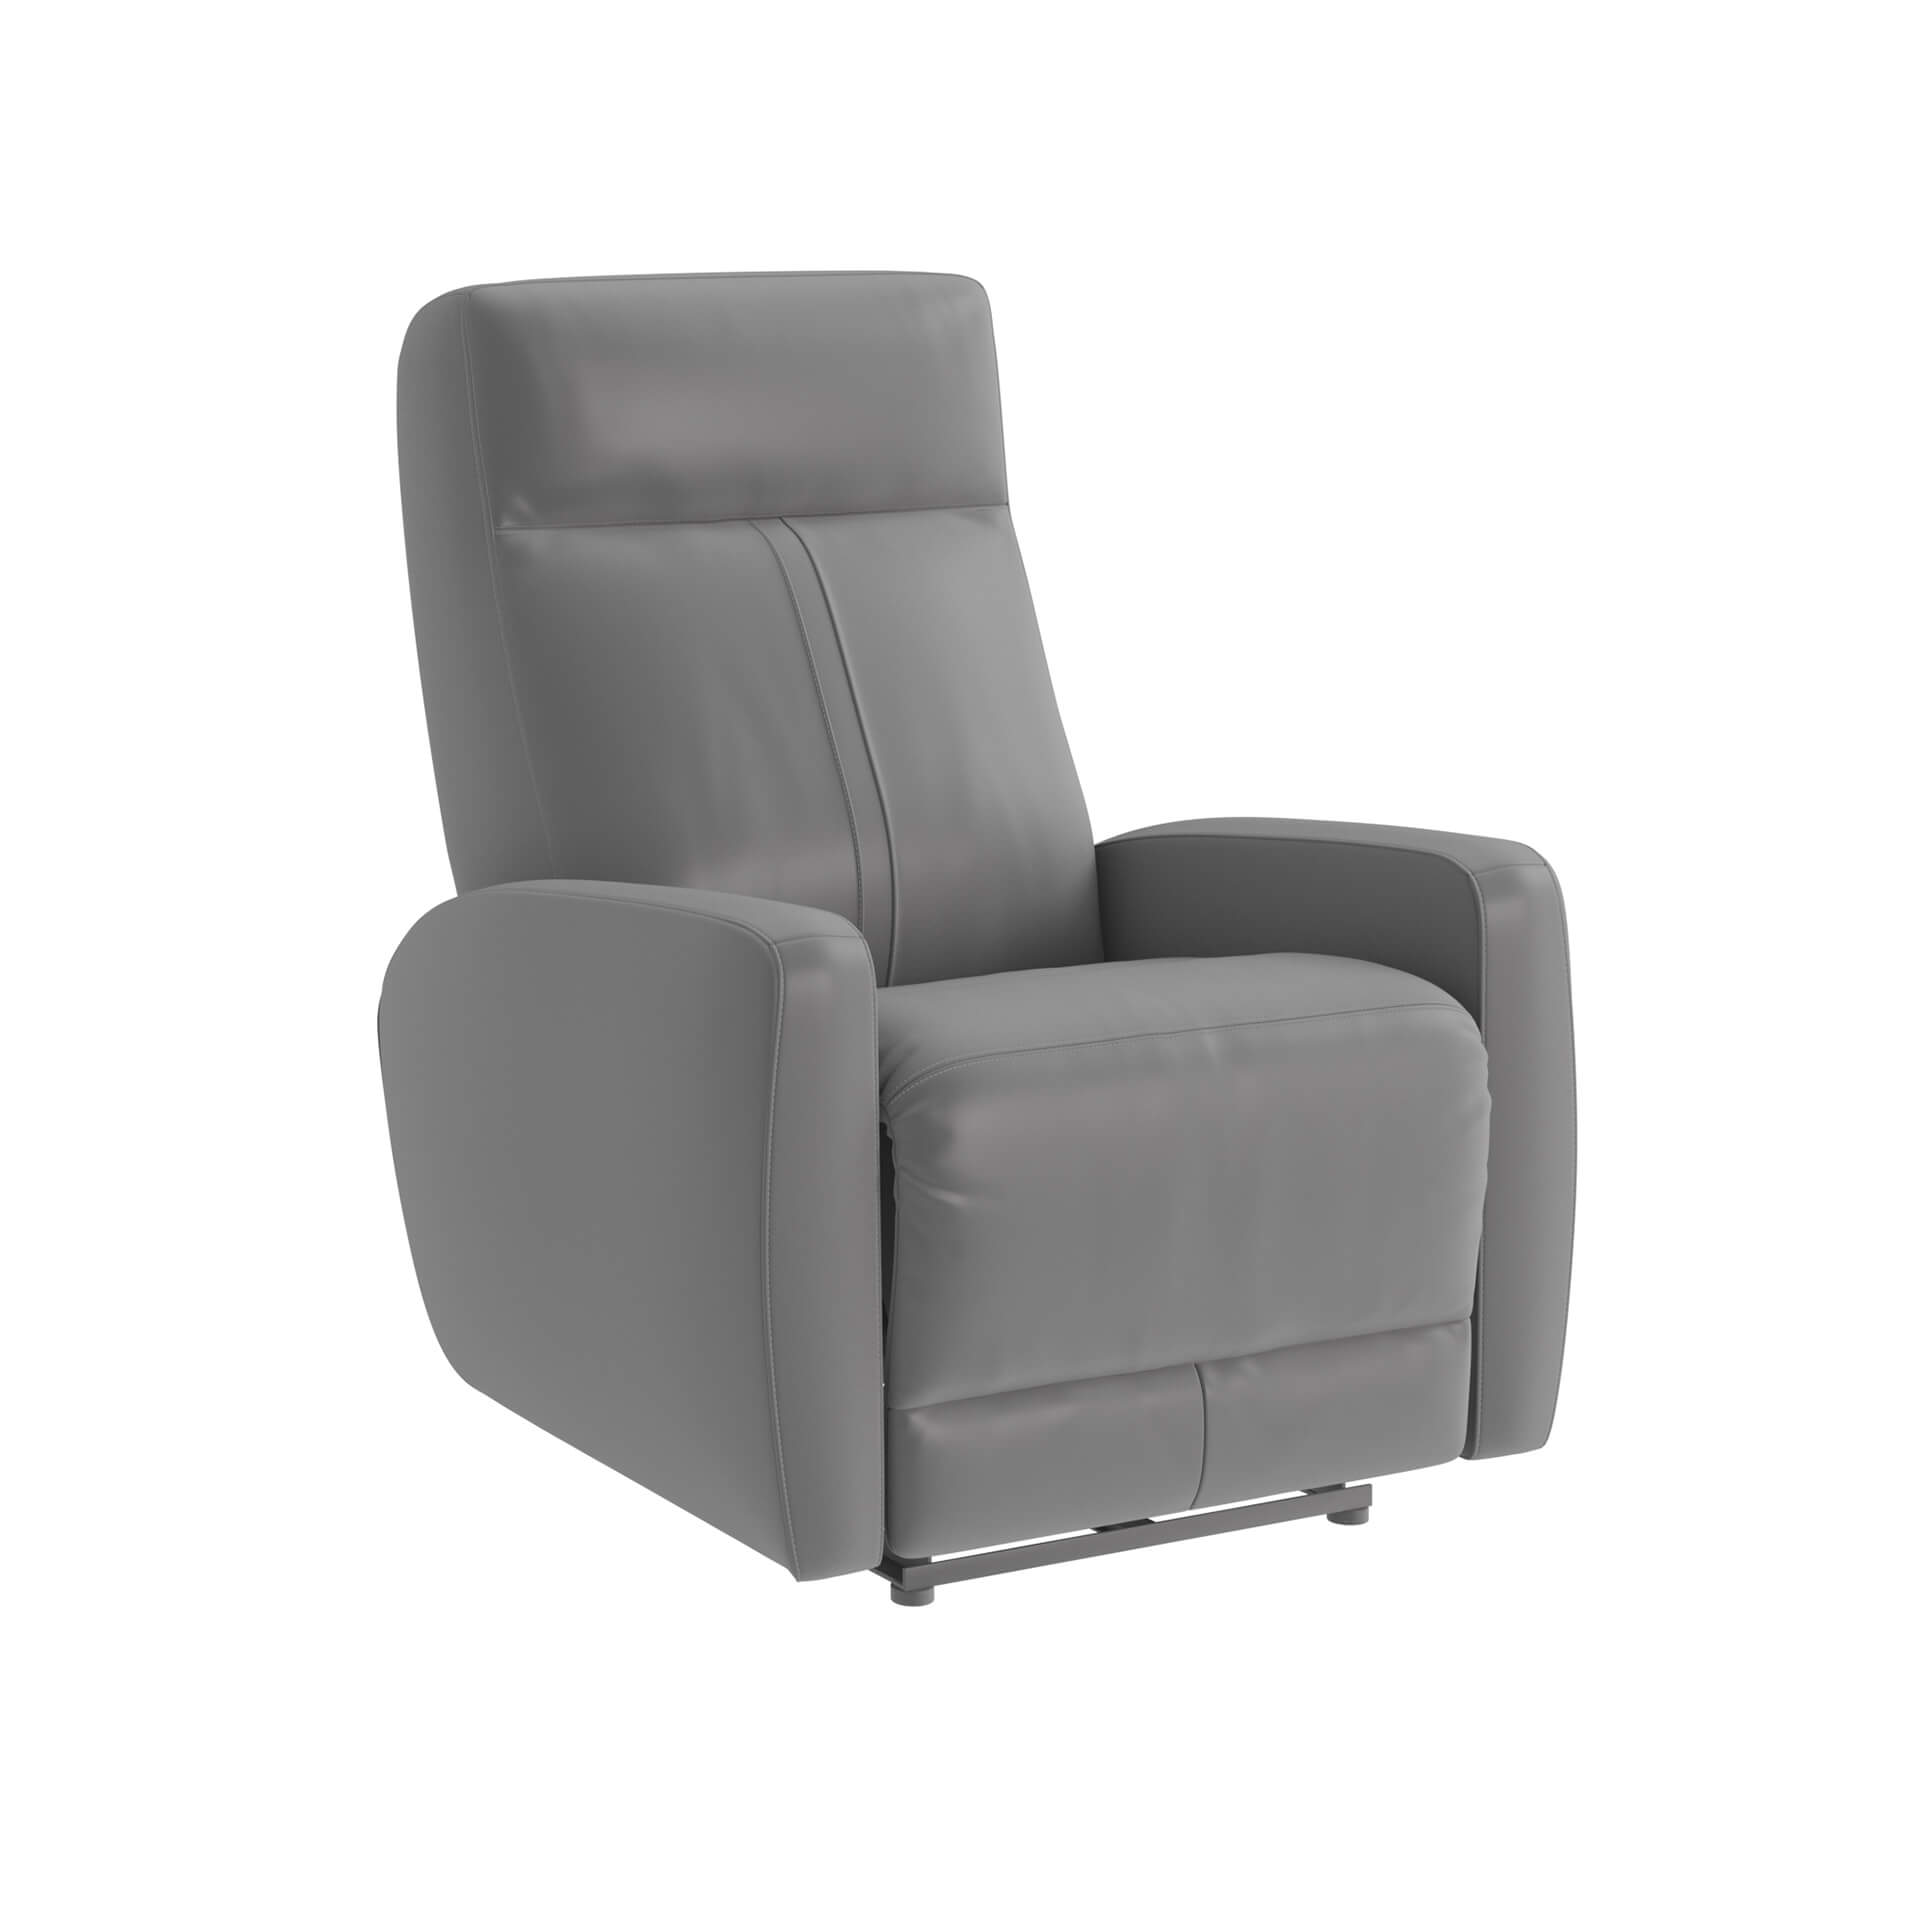 45-Degree View of a Massage Armchair 3D Model